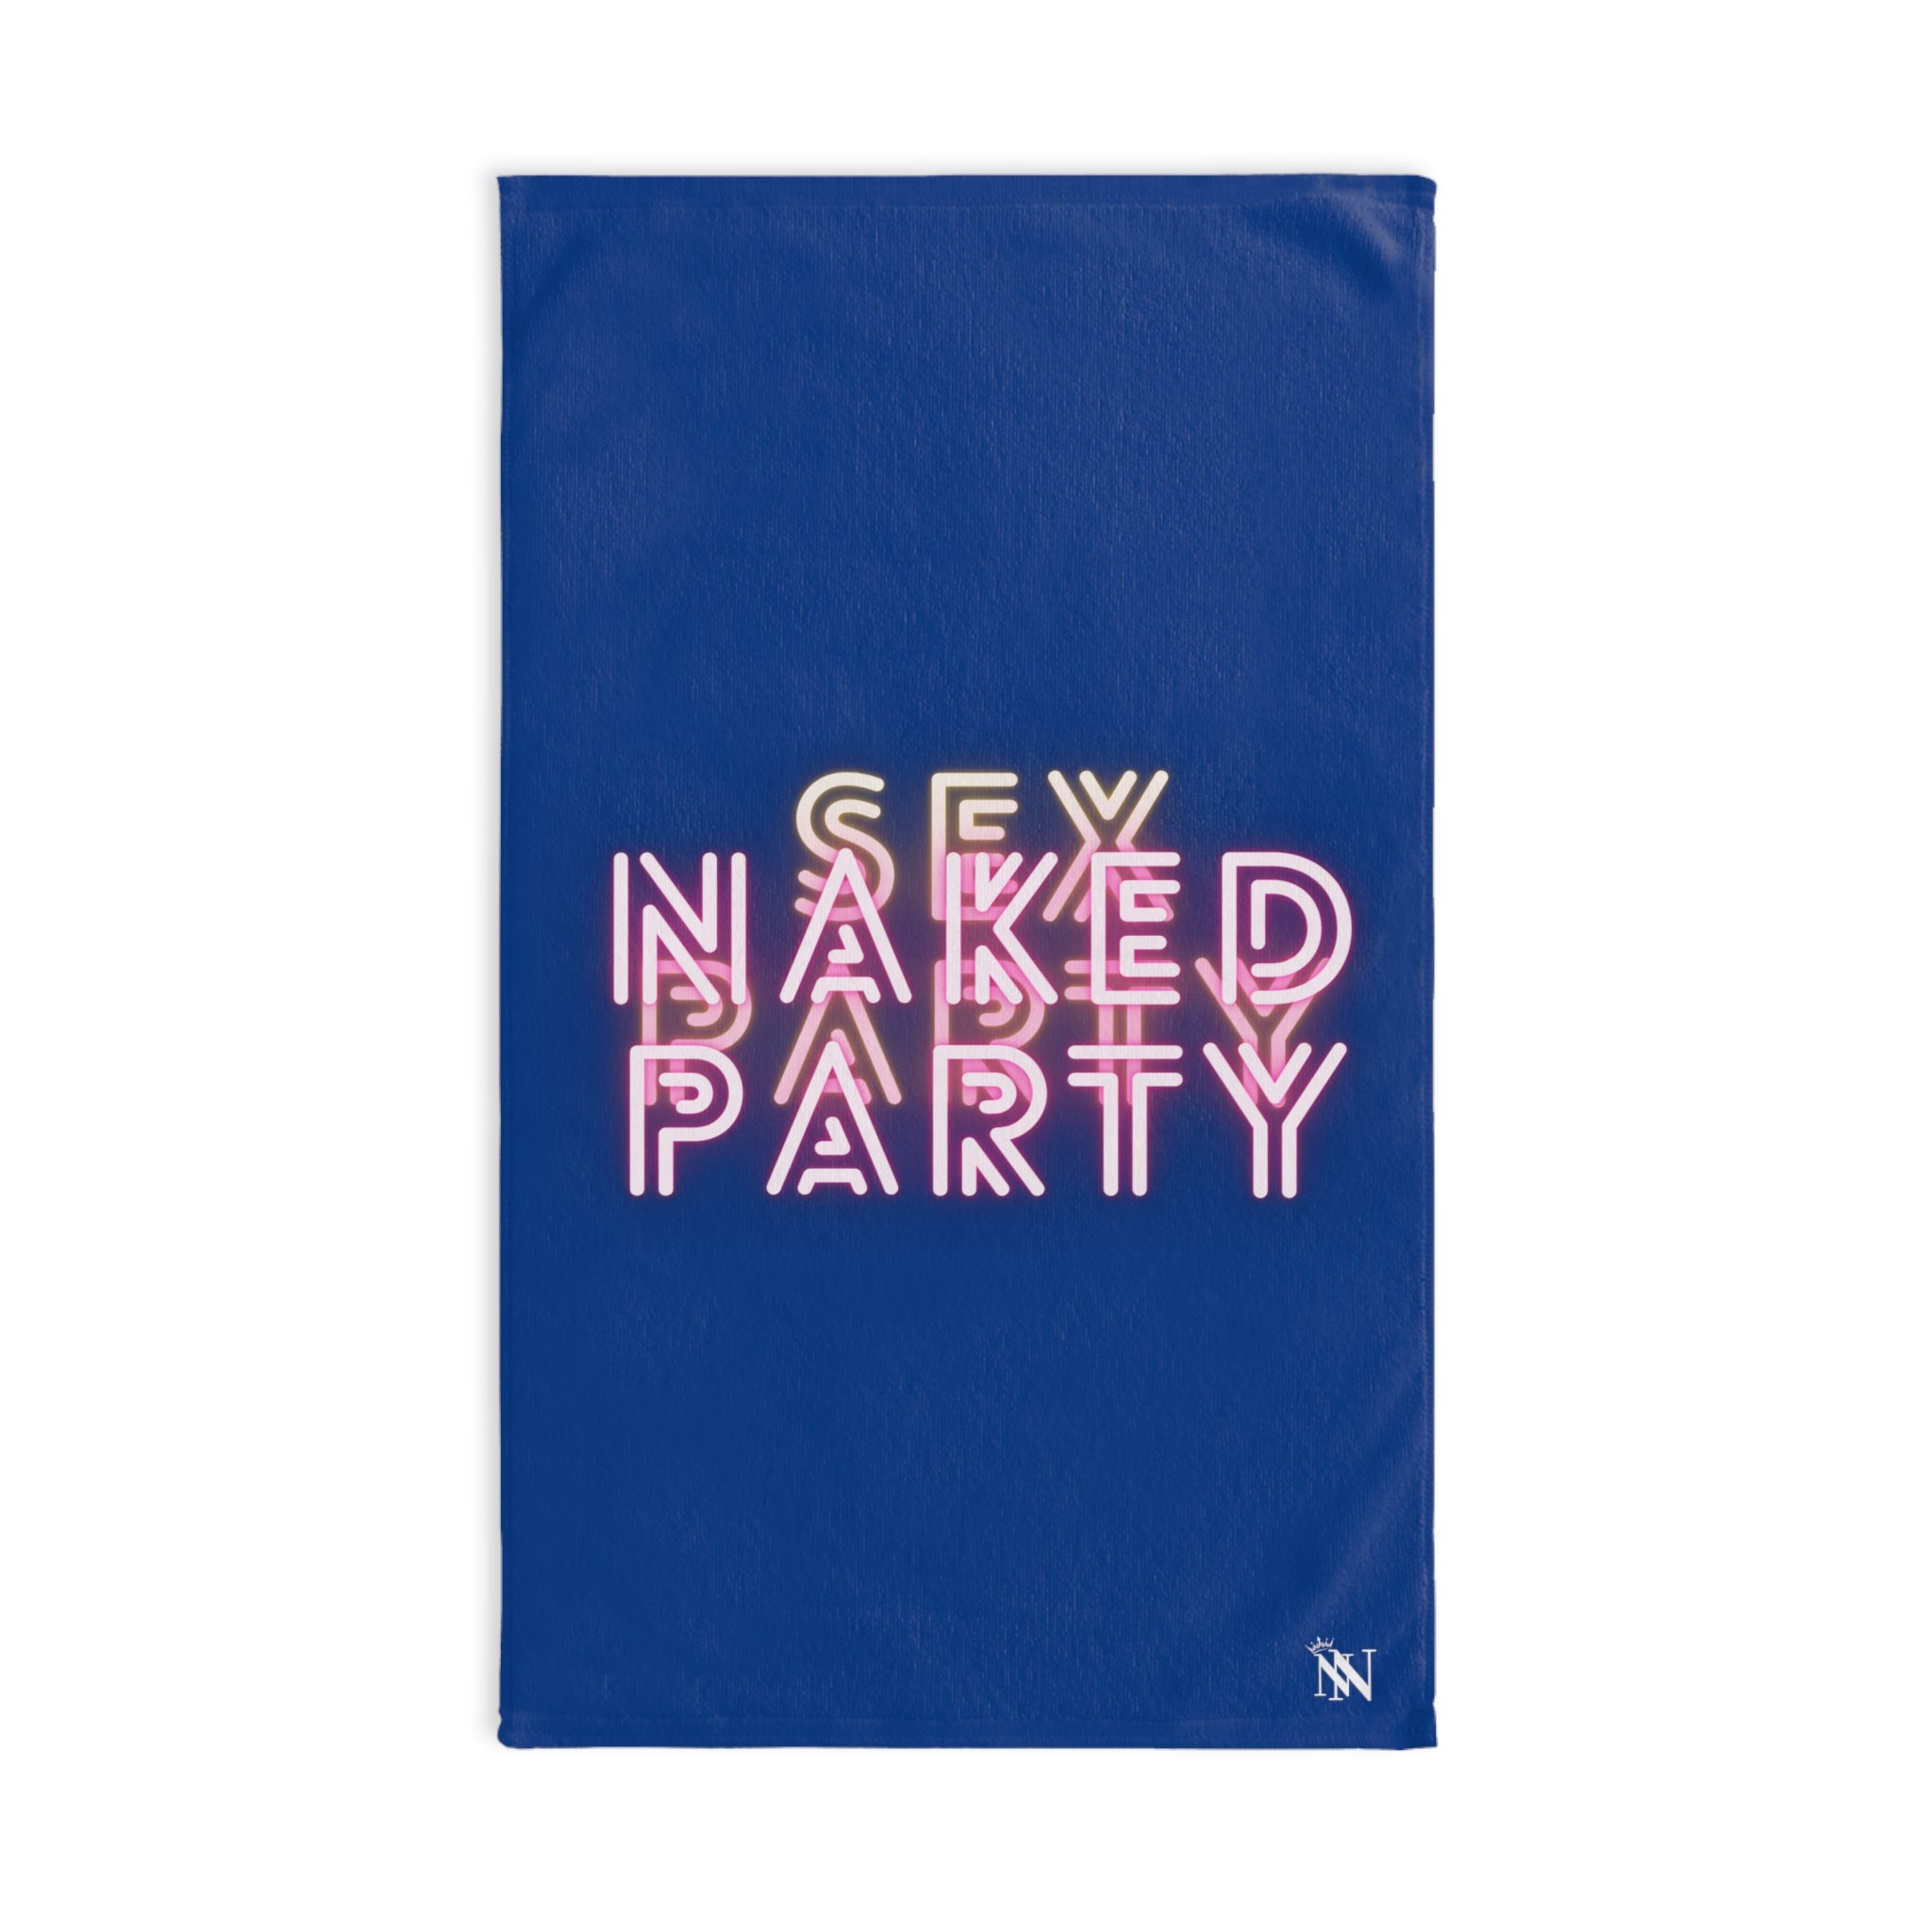 Naked  Party Blue | Gifts for Boyfriend, Funny Towel Romantic Gift for Wedding Couple Fiance First Year Anniversary Valentines, Party Gag Gifts, Joke Humor Cloth for Husband Men BF NECTAR NAPKINS